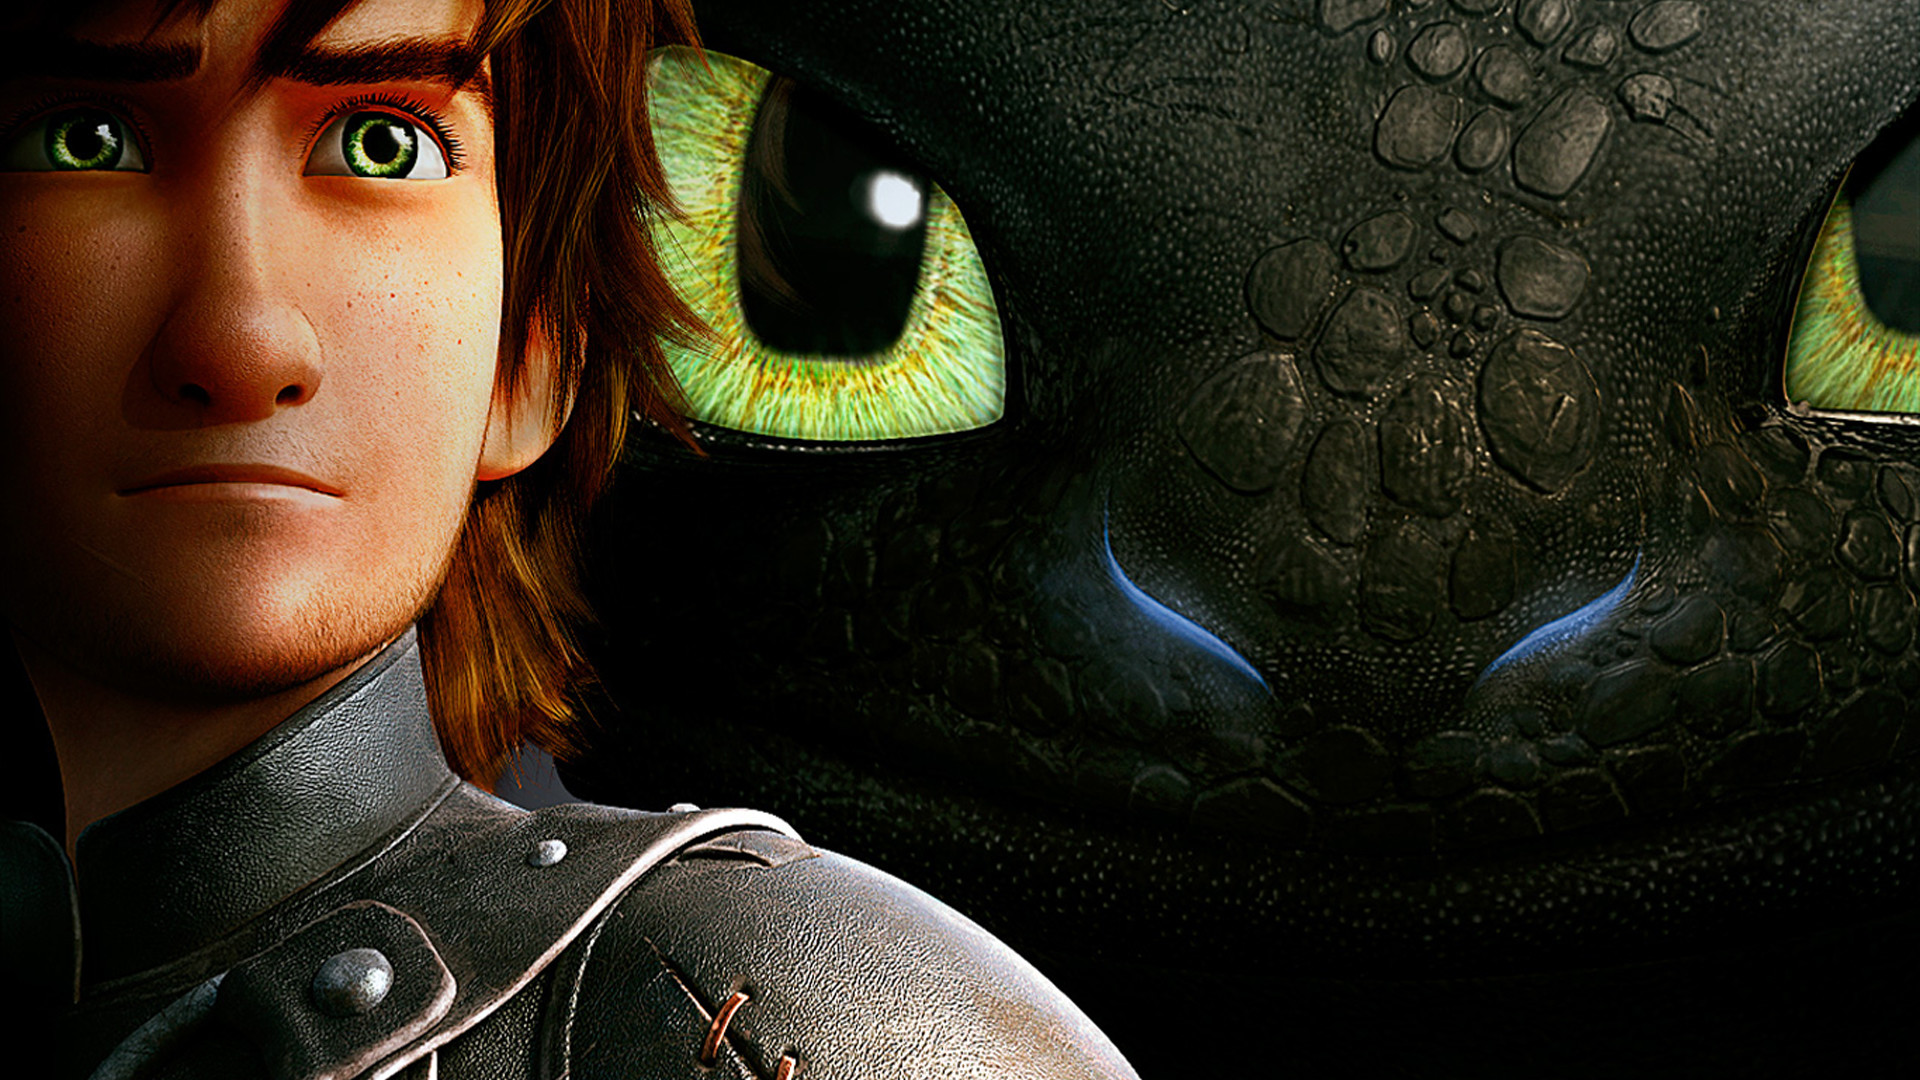 1920x1080 hiccup and toothless / night fury in how to train your dragon 2